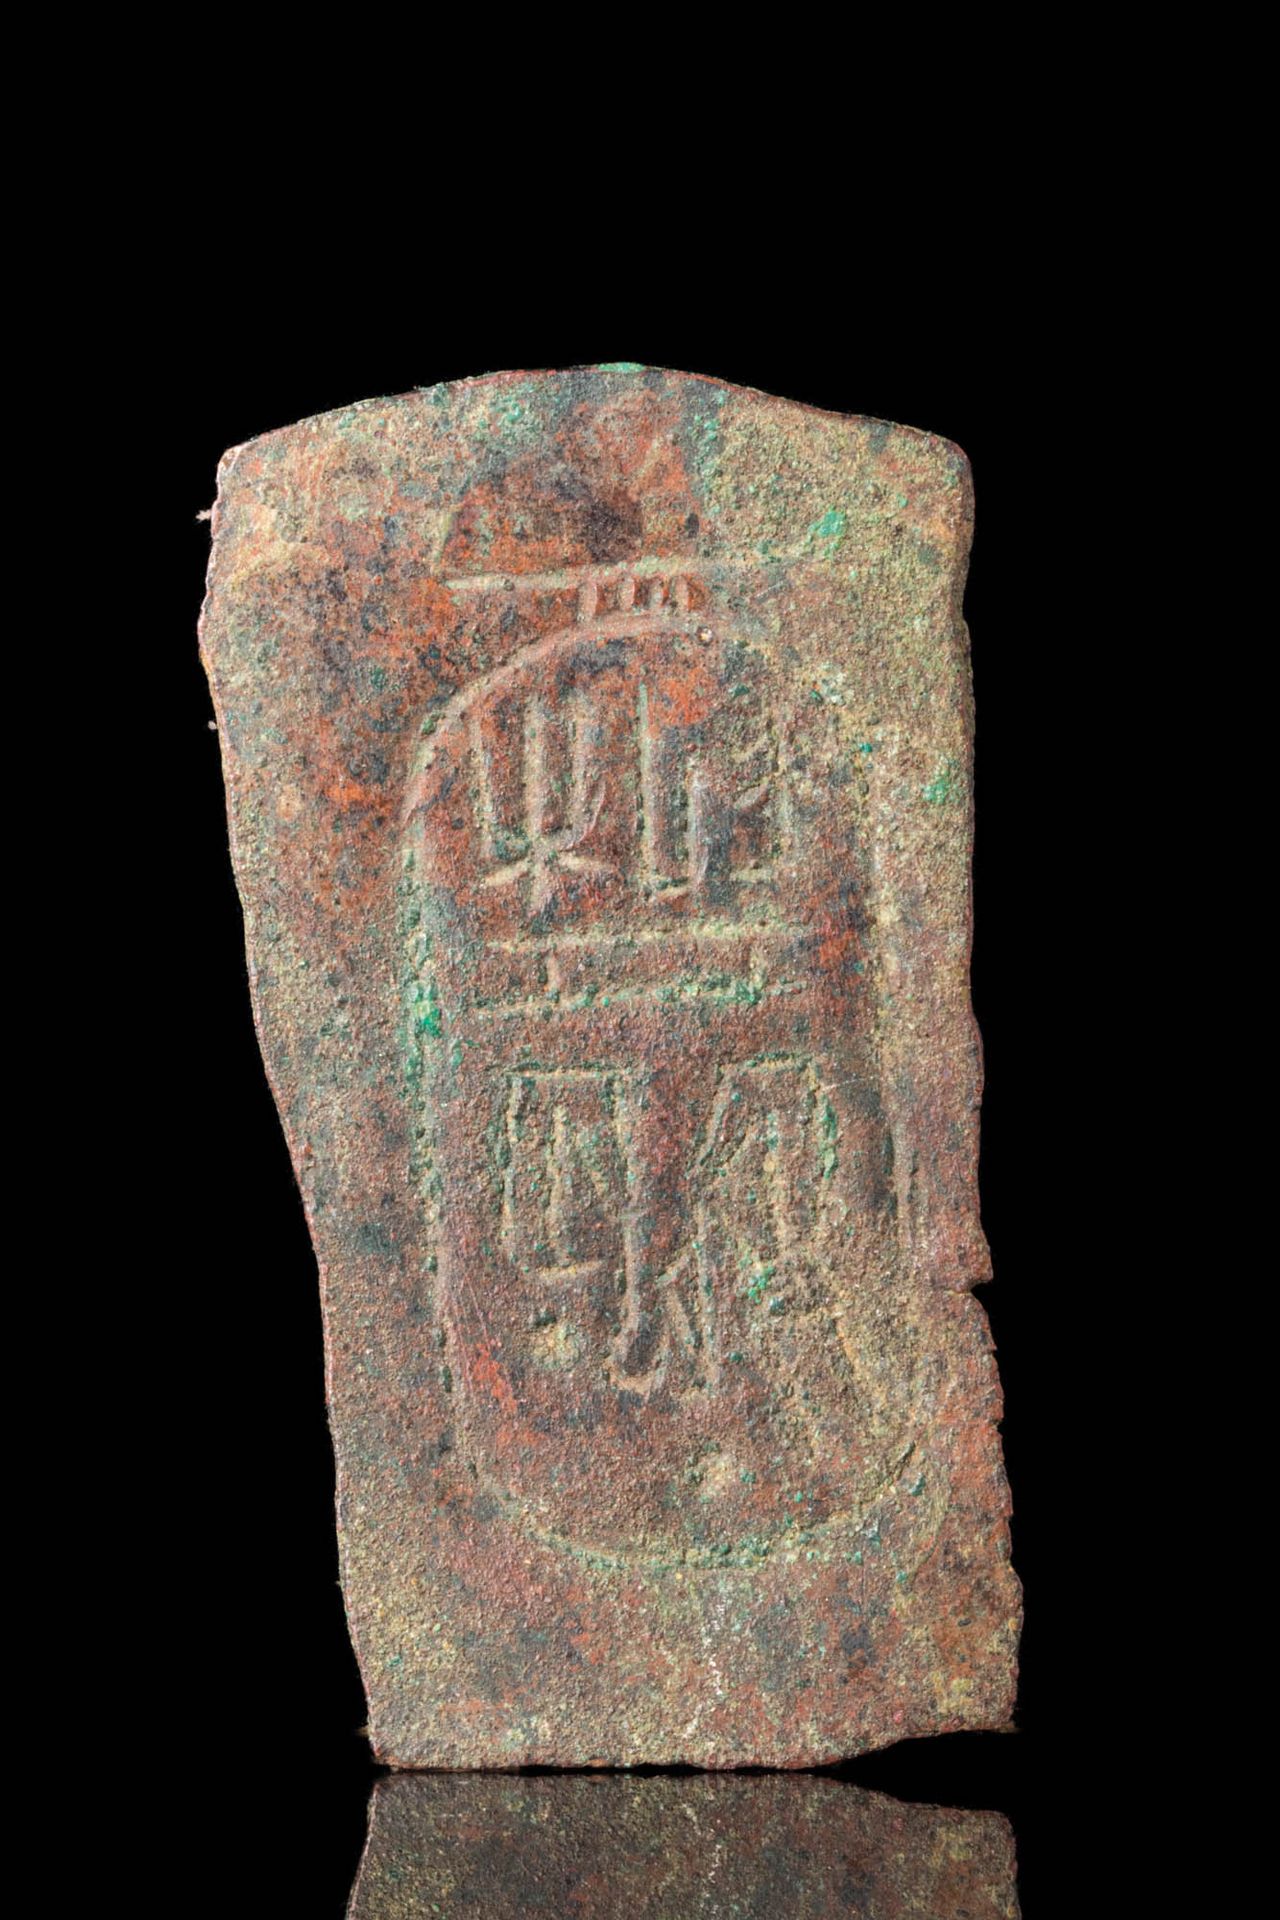 EGYPTIAN BRONZE FRAGMENT WITH A CARTOUCHE OF RAMESSESE II 新王国，约公元前 1279 - 1212 年&hellip;